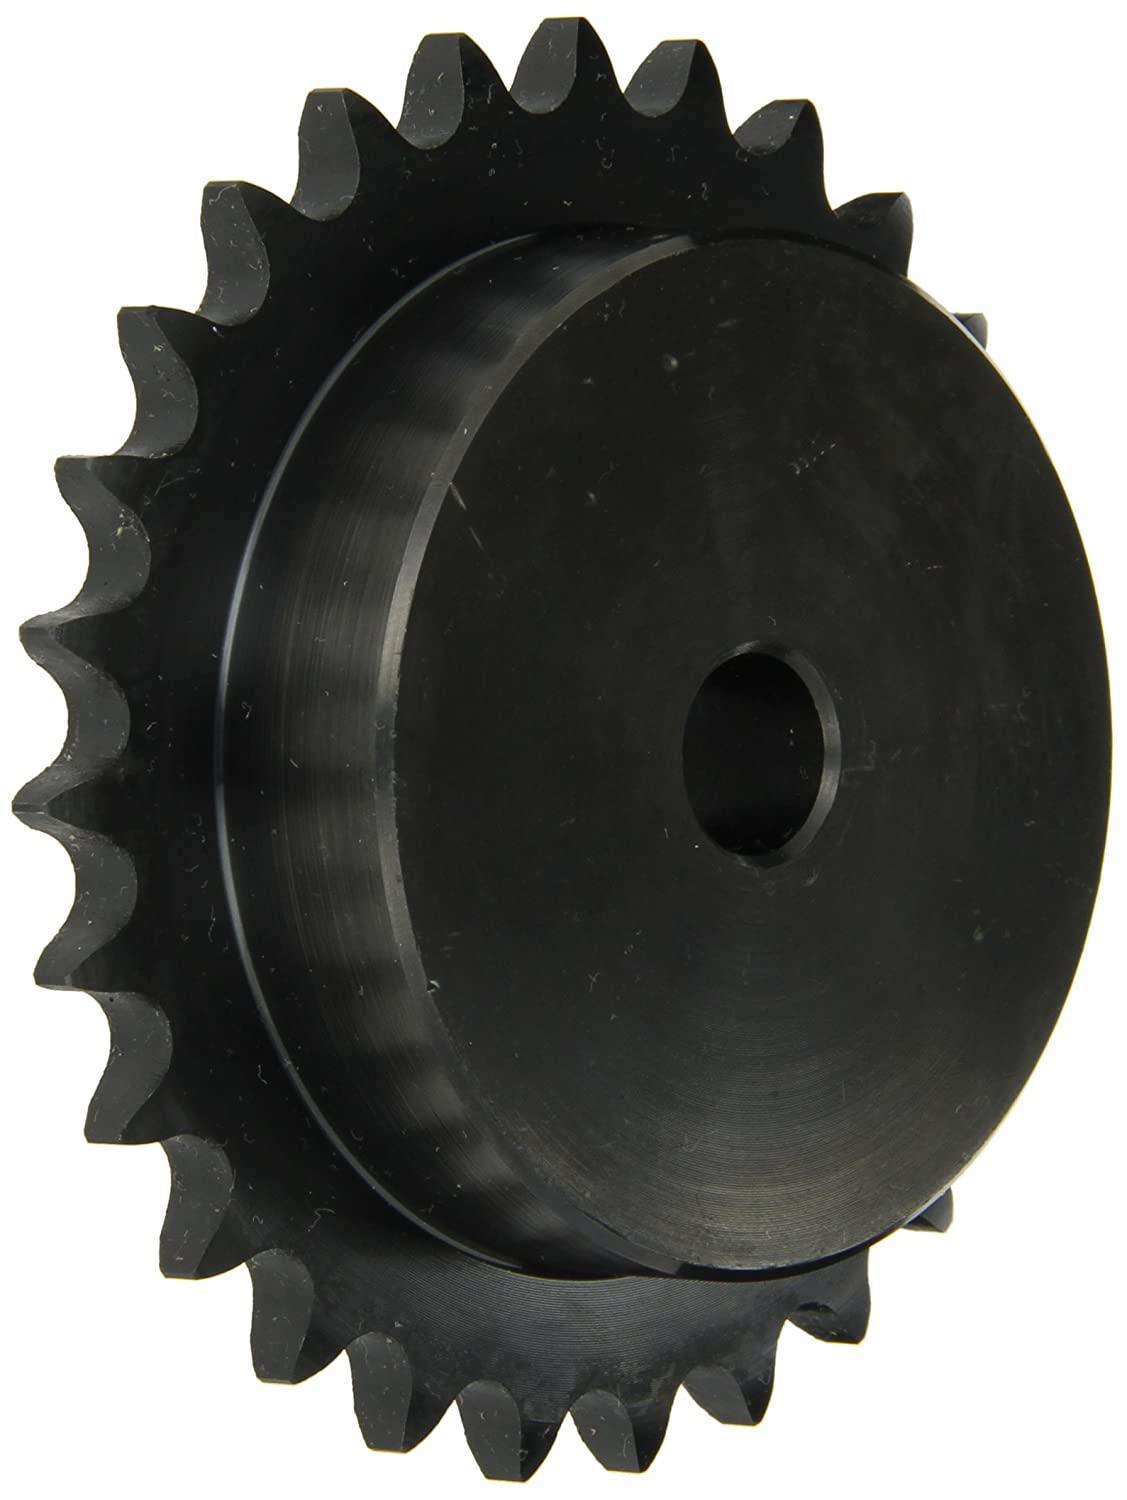 25B20 Roller Chain Sprocket With Stock Bore - Forces Inc